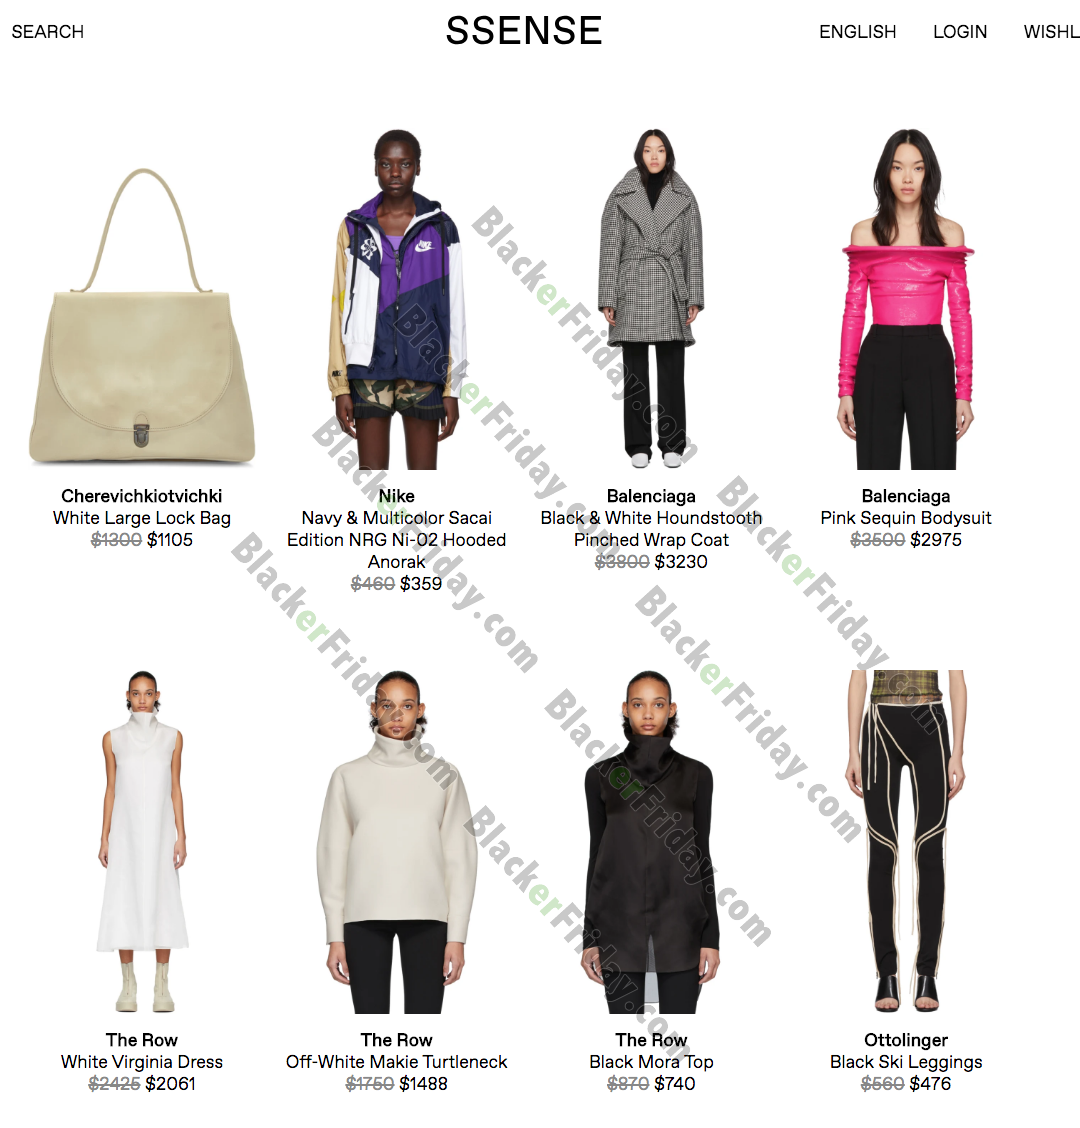 Ssense Black Friday 2021 Sale - What to 